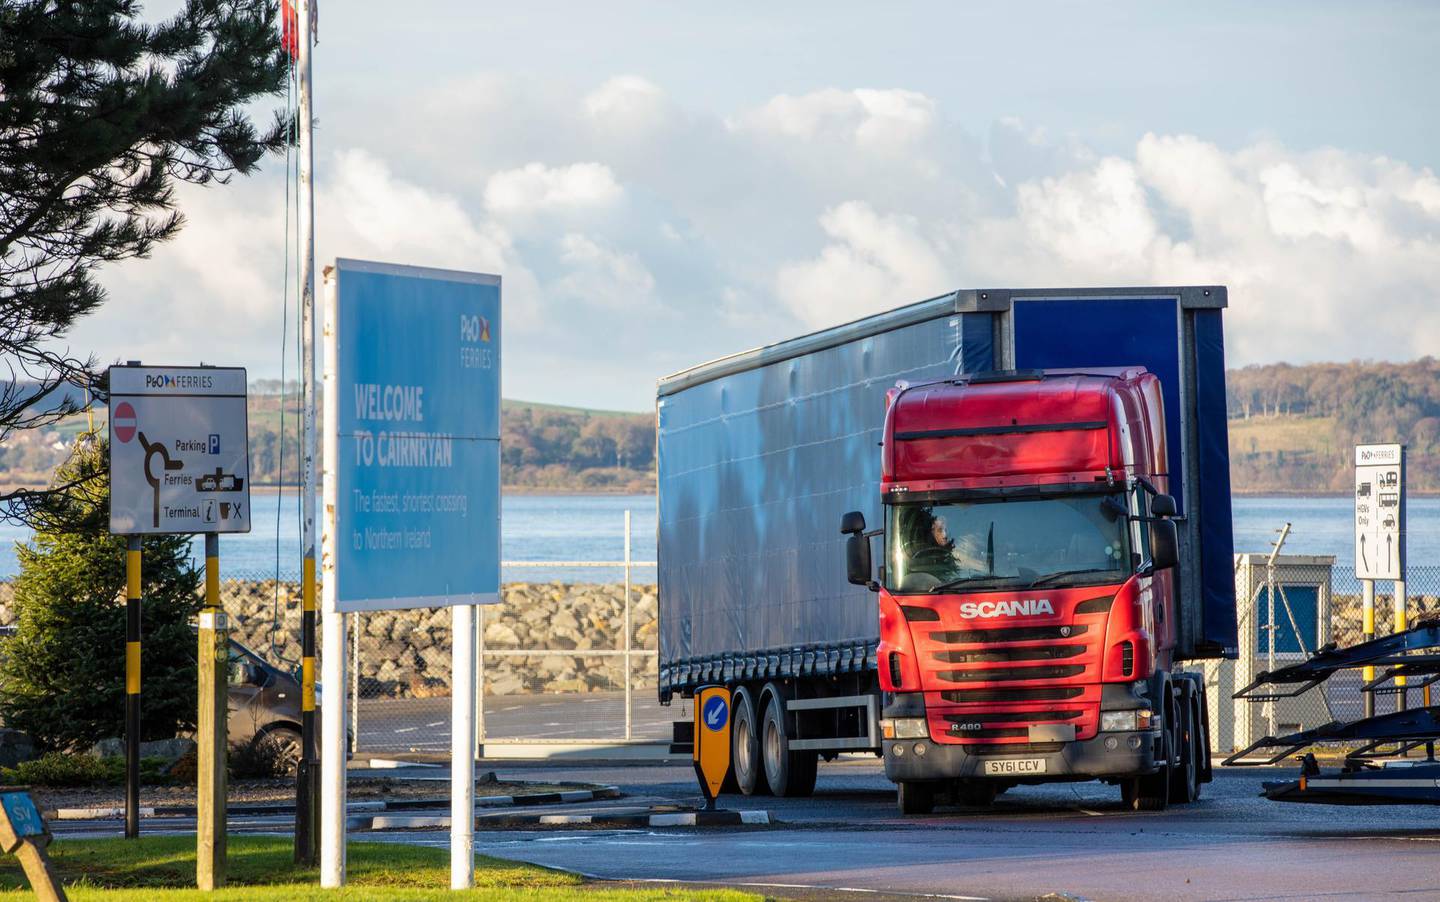 A haulage truck departs from Cairnryan Port, in Cairnryan, Scotland, U.K., on Monday, Dec. 7, 2020. U.K. Prime Minister Boris Johnson warned a time may be coming to recognize that Brexit negotiations have failed, as he prepares to travel to Brussels for crisis talks on a future trade deal. Photographer: Paul Faith/Bloomberg